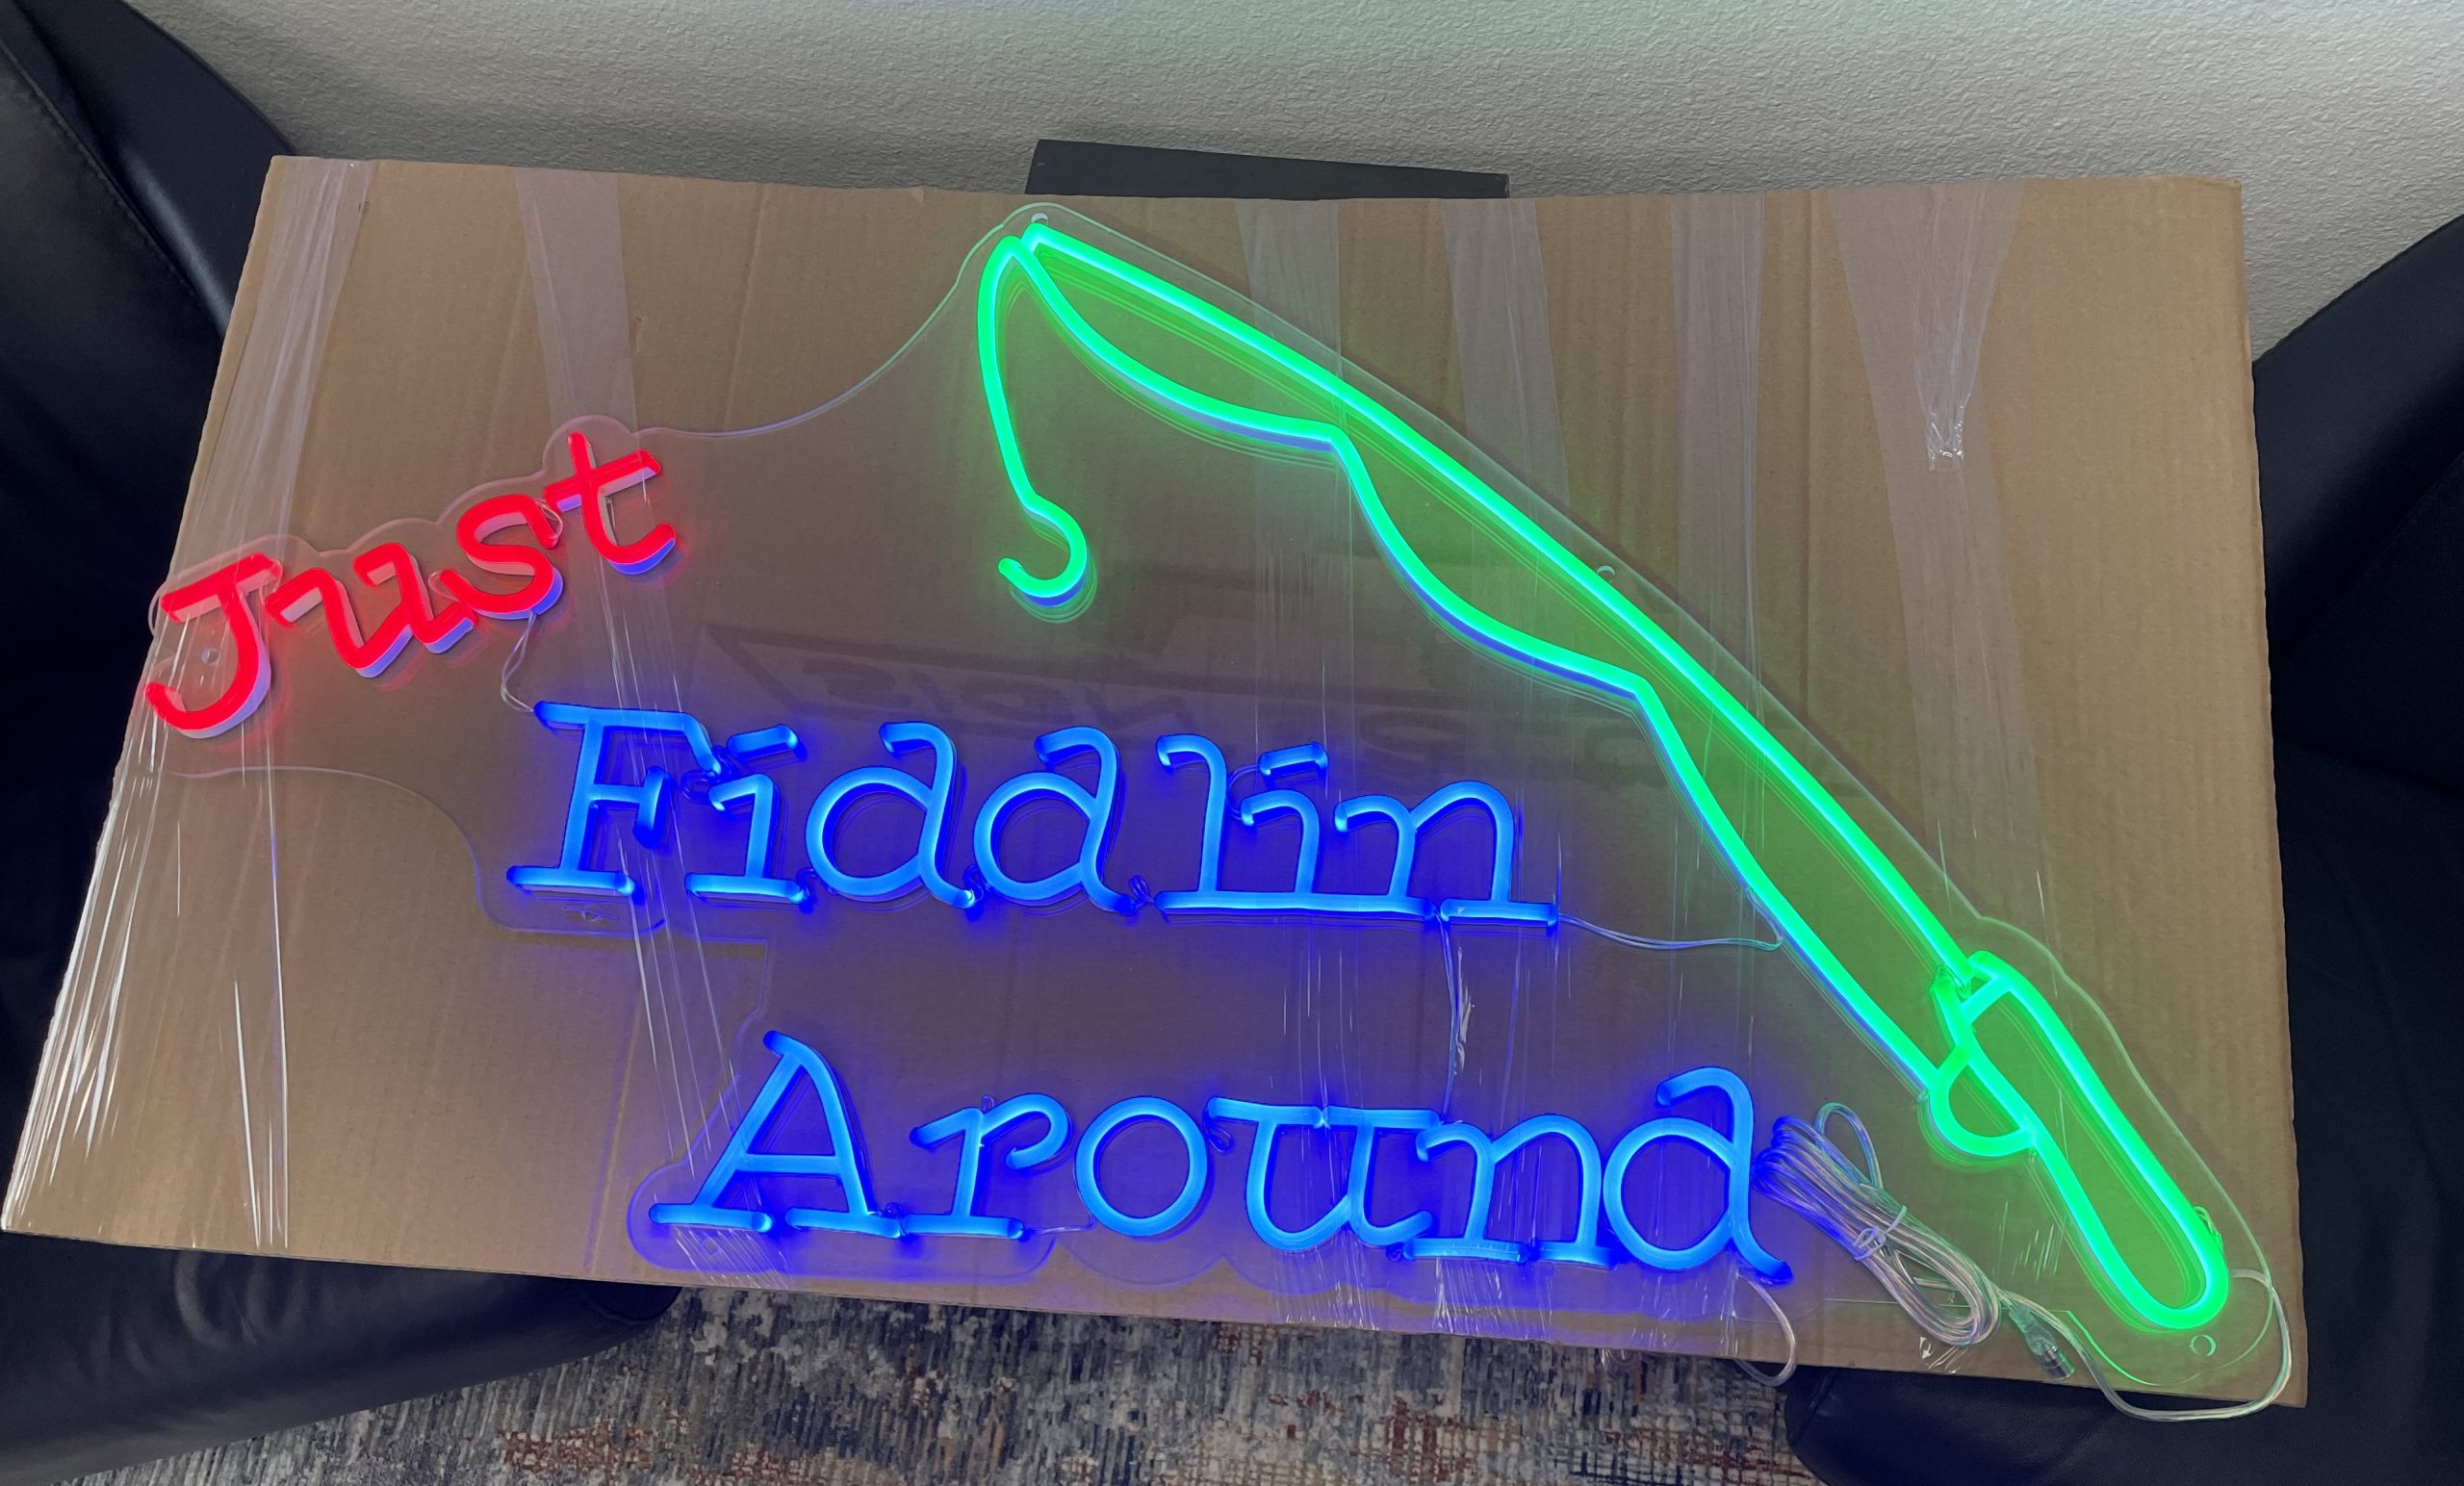 The holidays are approaching and it's time to decorate places with signage even give them as gifts. Like this neon sign gift spelling out "Just Fiddlin Around."